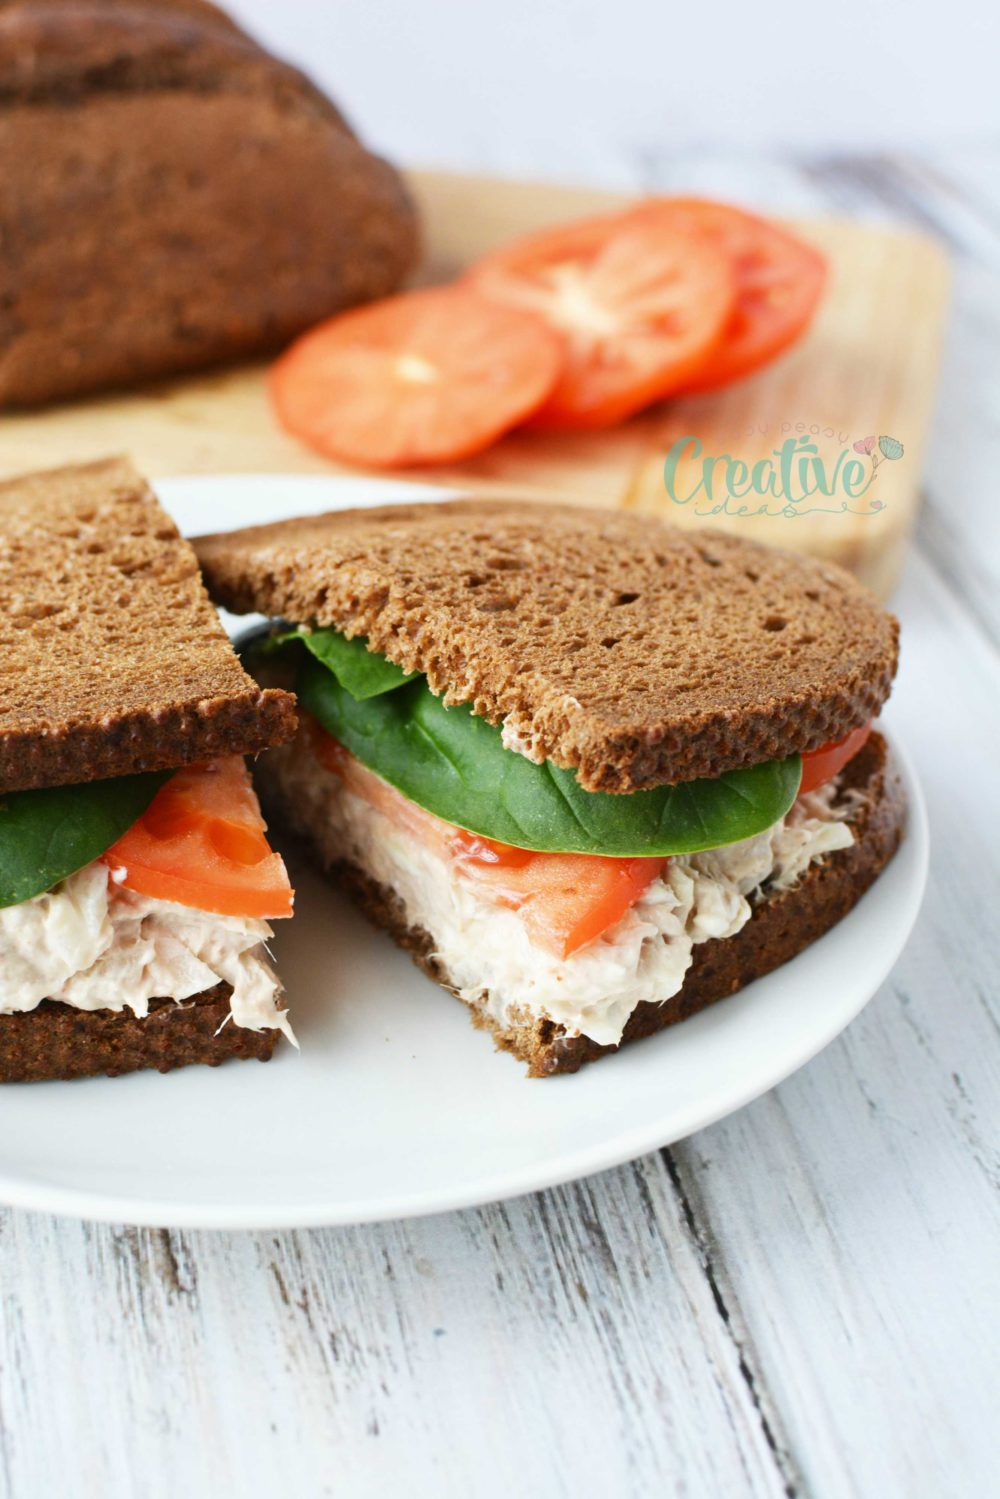 the best tuna spread recipe with simple but delicious ingredients like cream cheese, onion, mayonnaise and hot sauce!